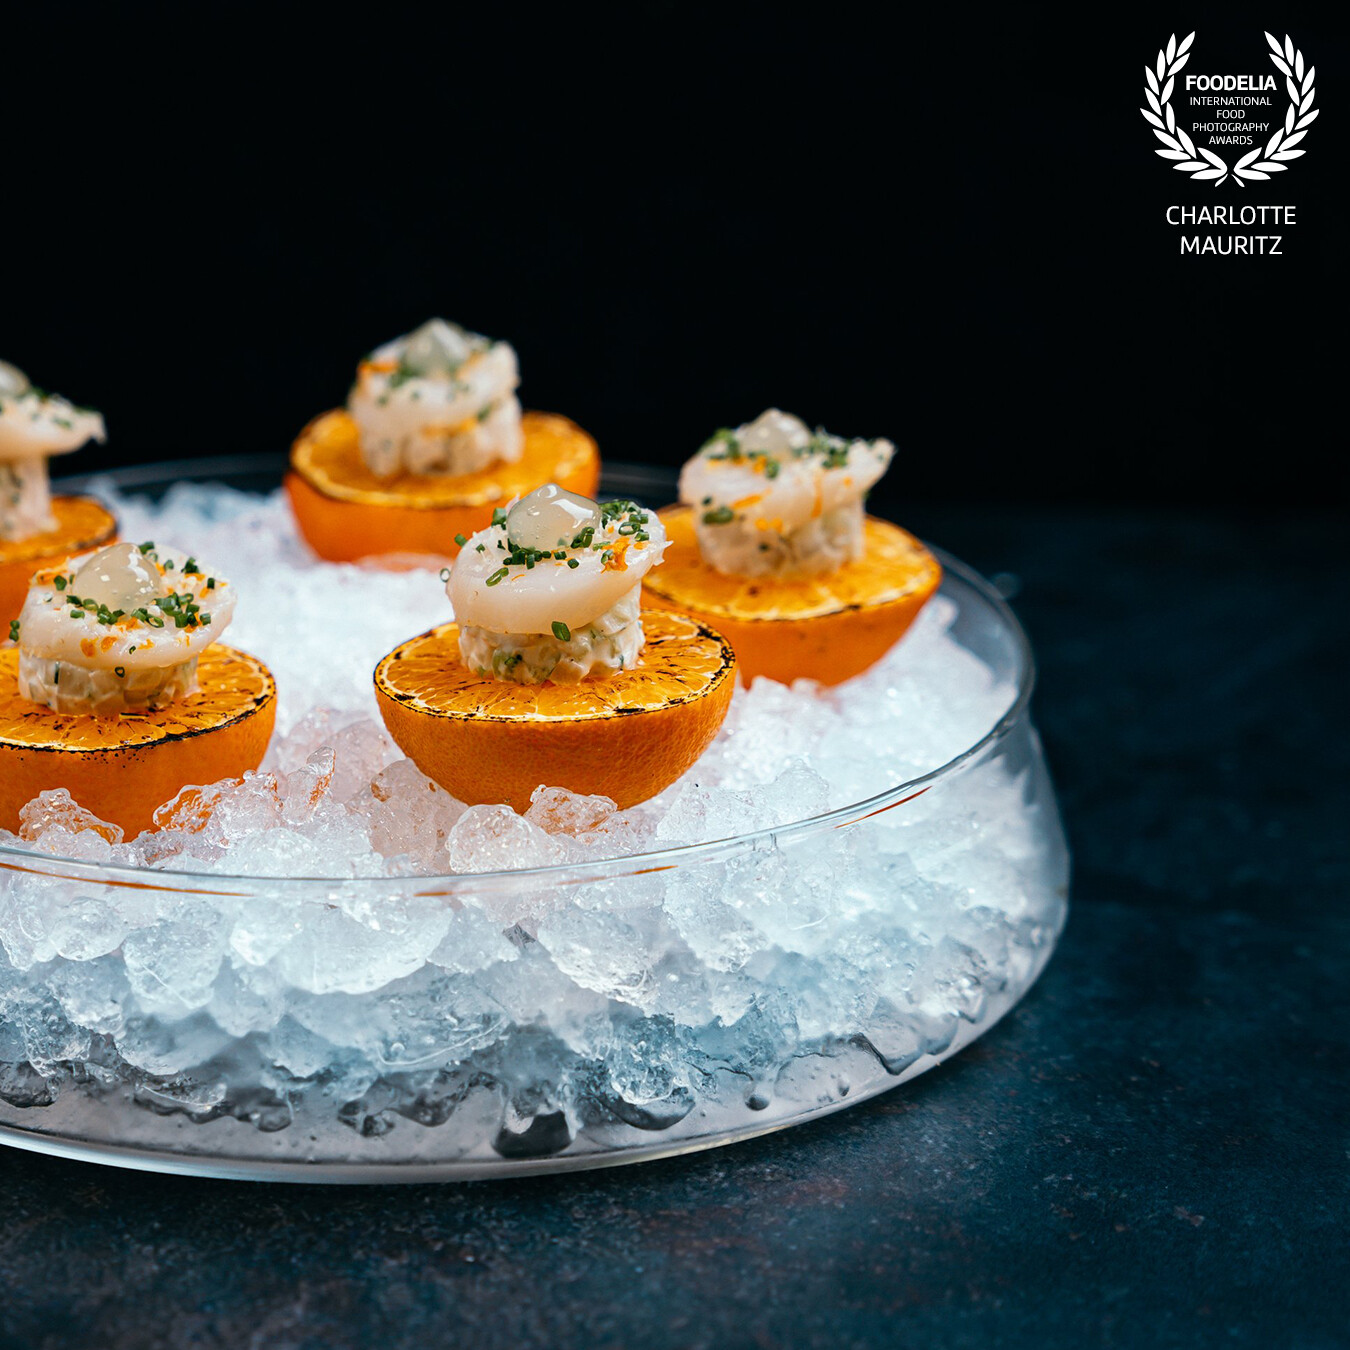 This amuse is part of the spring menu from high end cater famous flavours. It’s burned tangerine | scallops | chives served on ice.